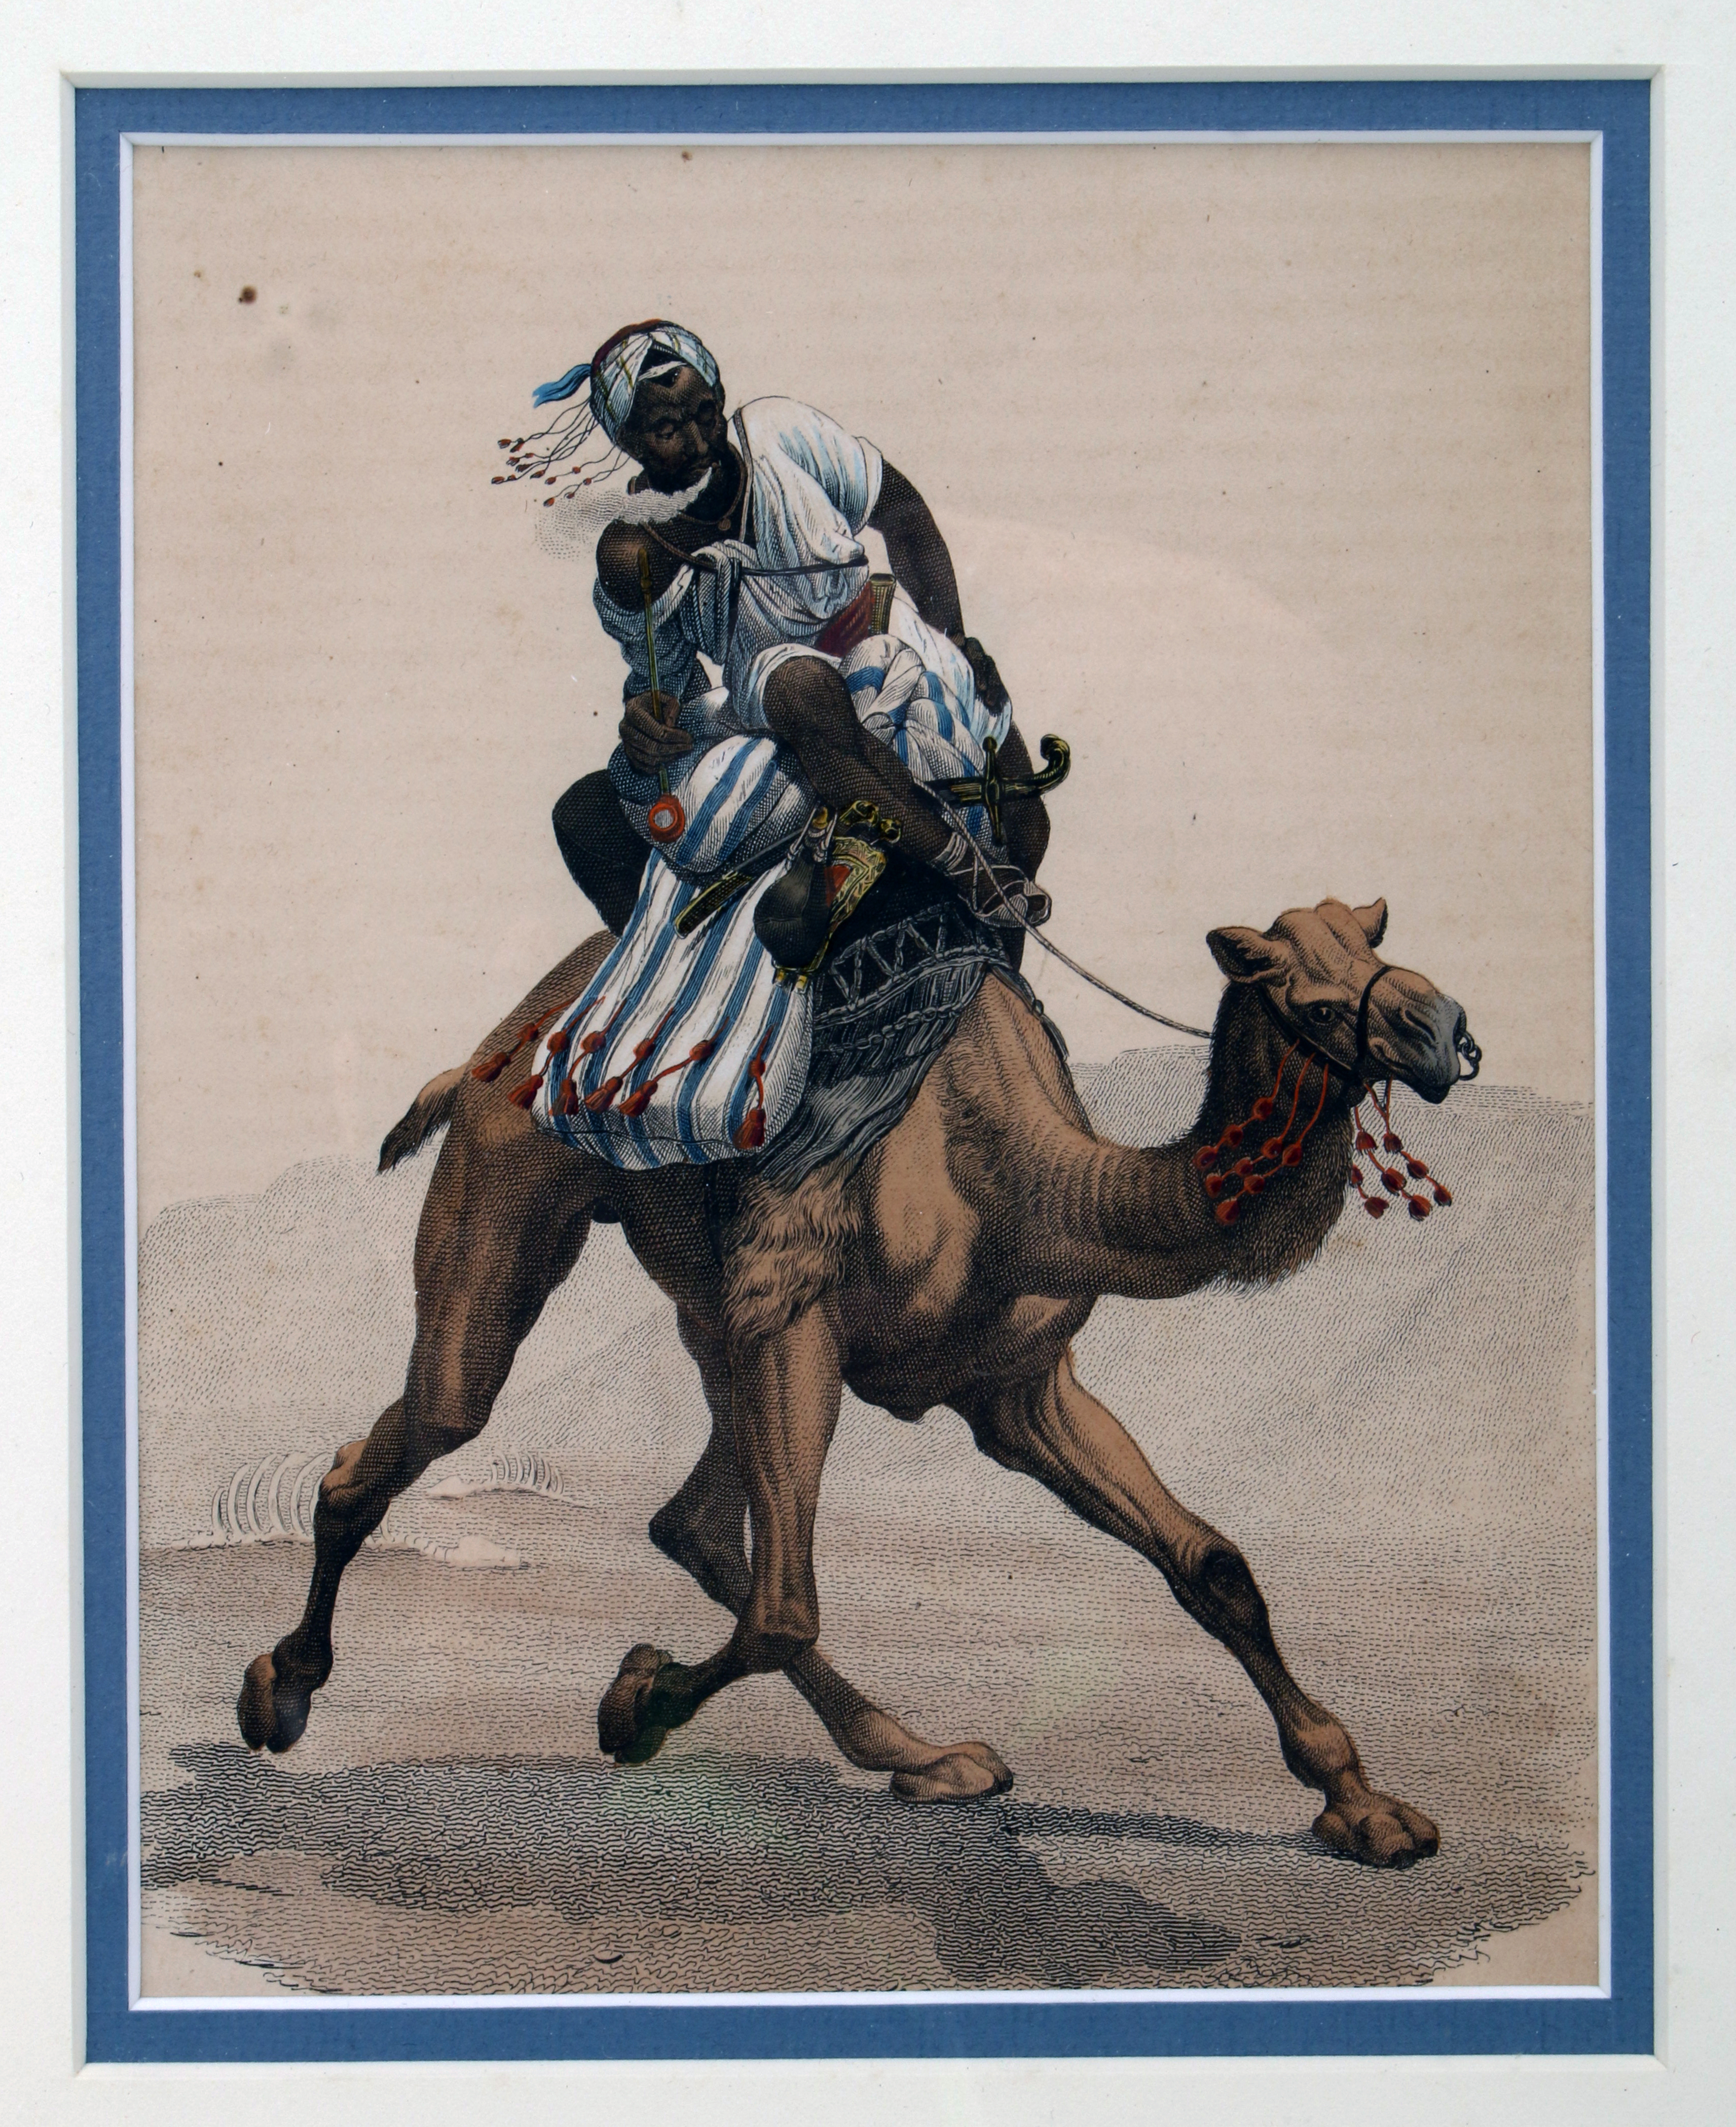 Vintage Hand-Colored Lithograph - Man On Camel In Desert image 1